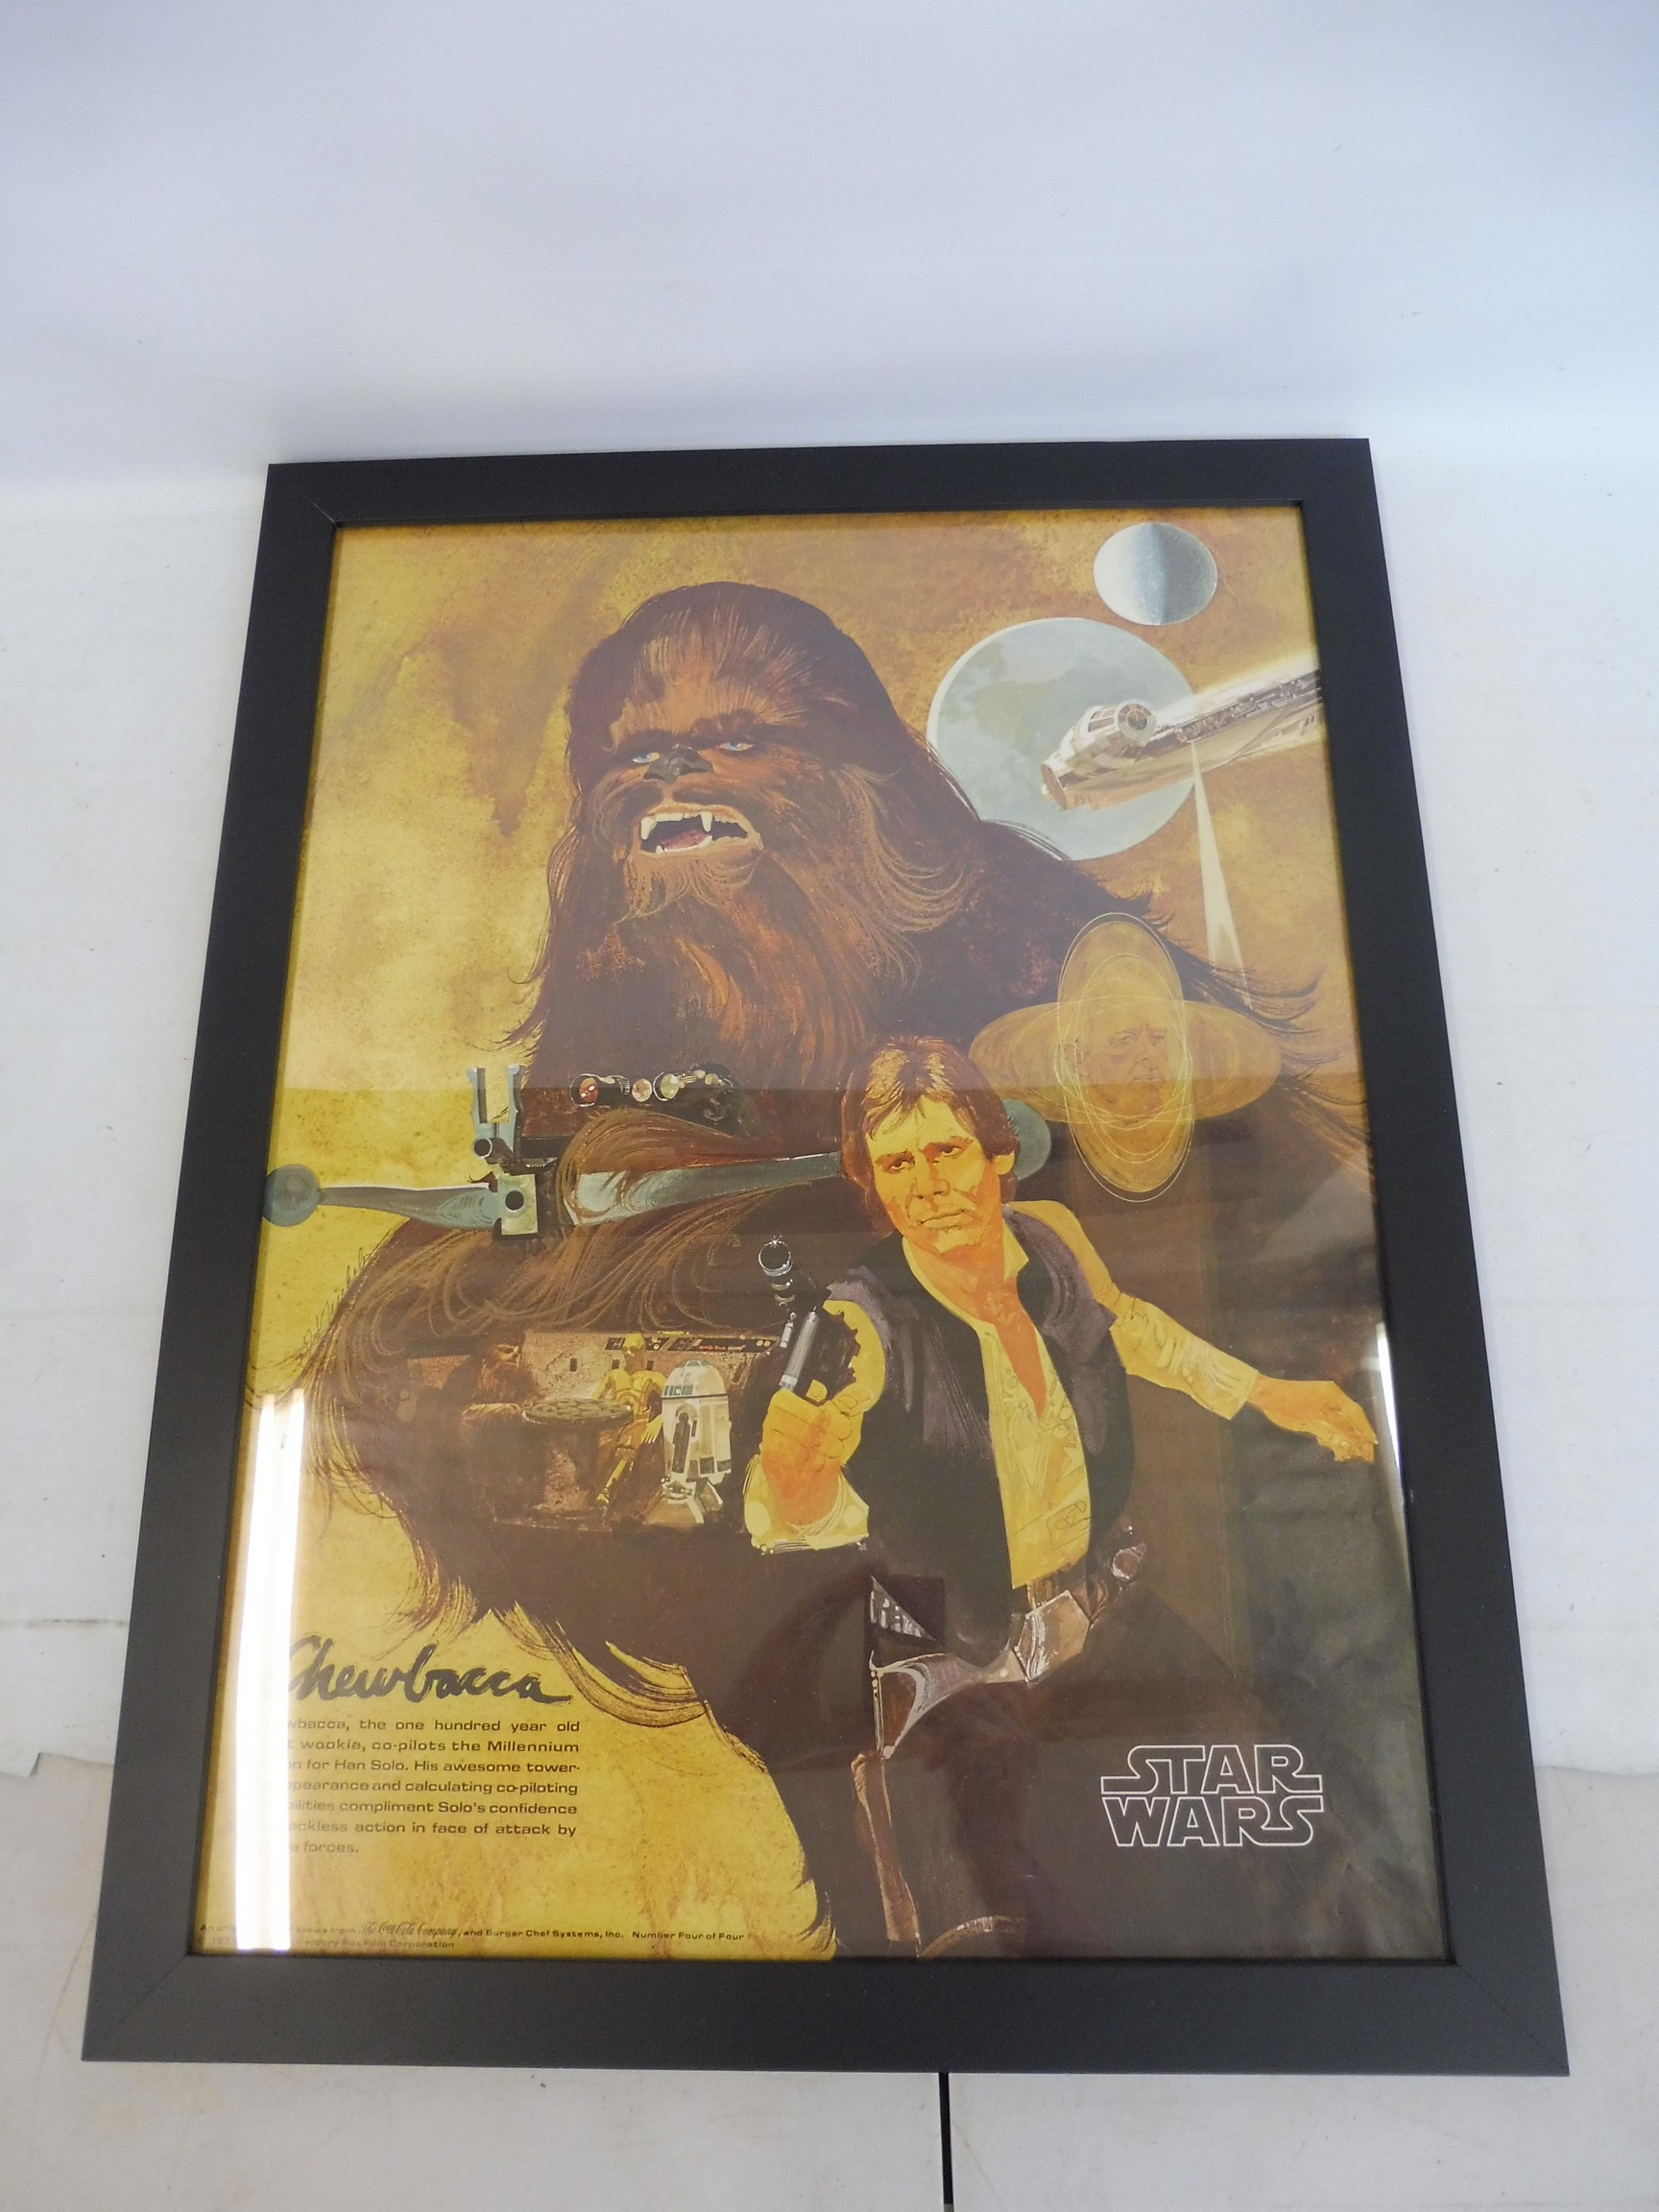 A Star Wars 1977 Coca Cola Chewbacca advertising poster.